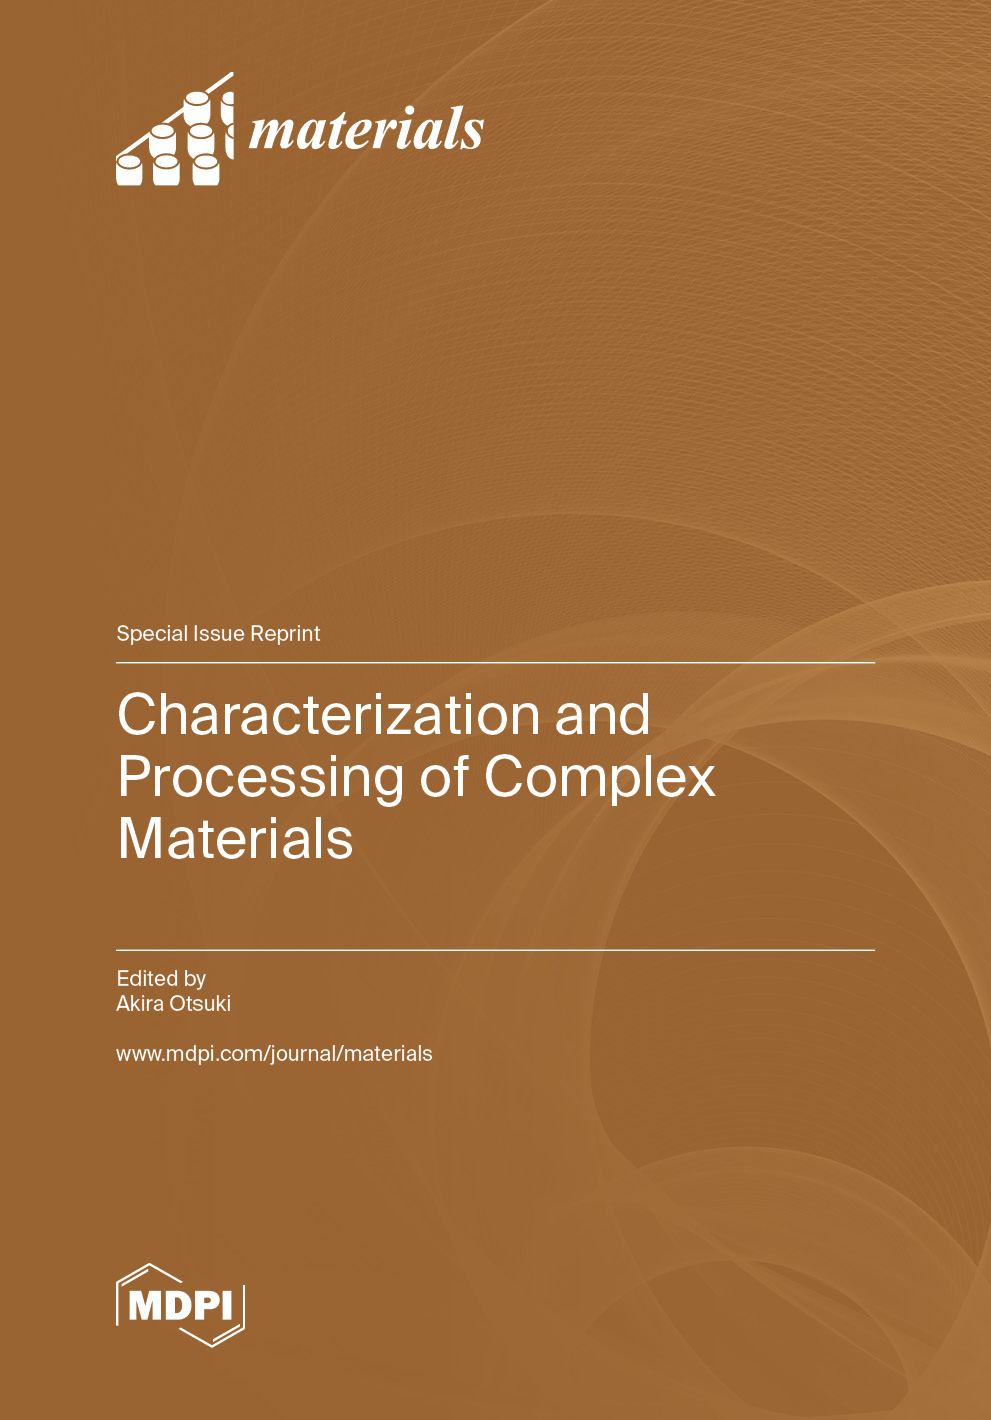 Characterization and Processing of Complex Materials